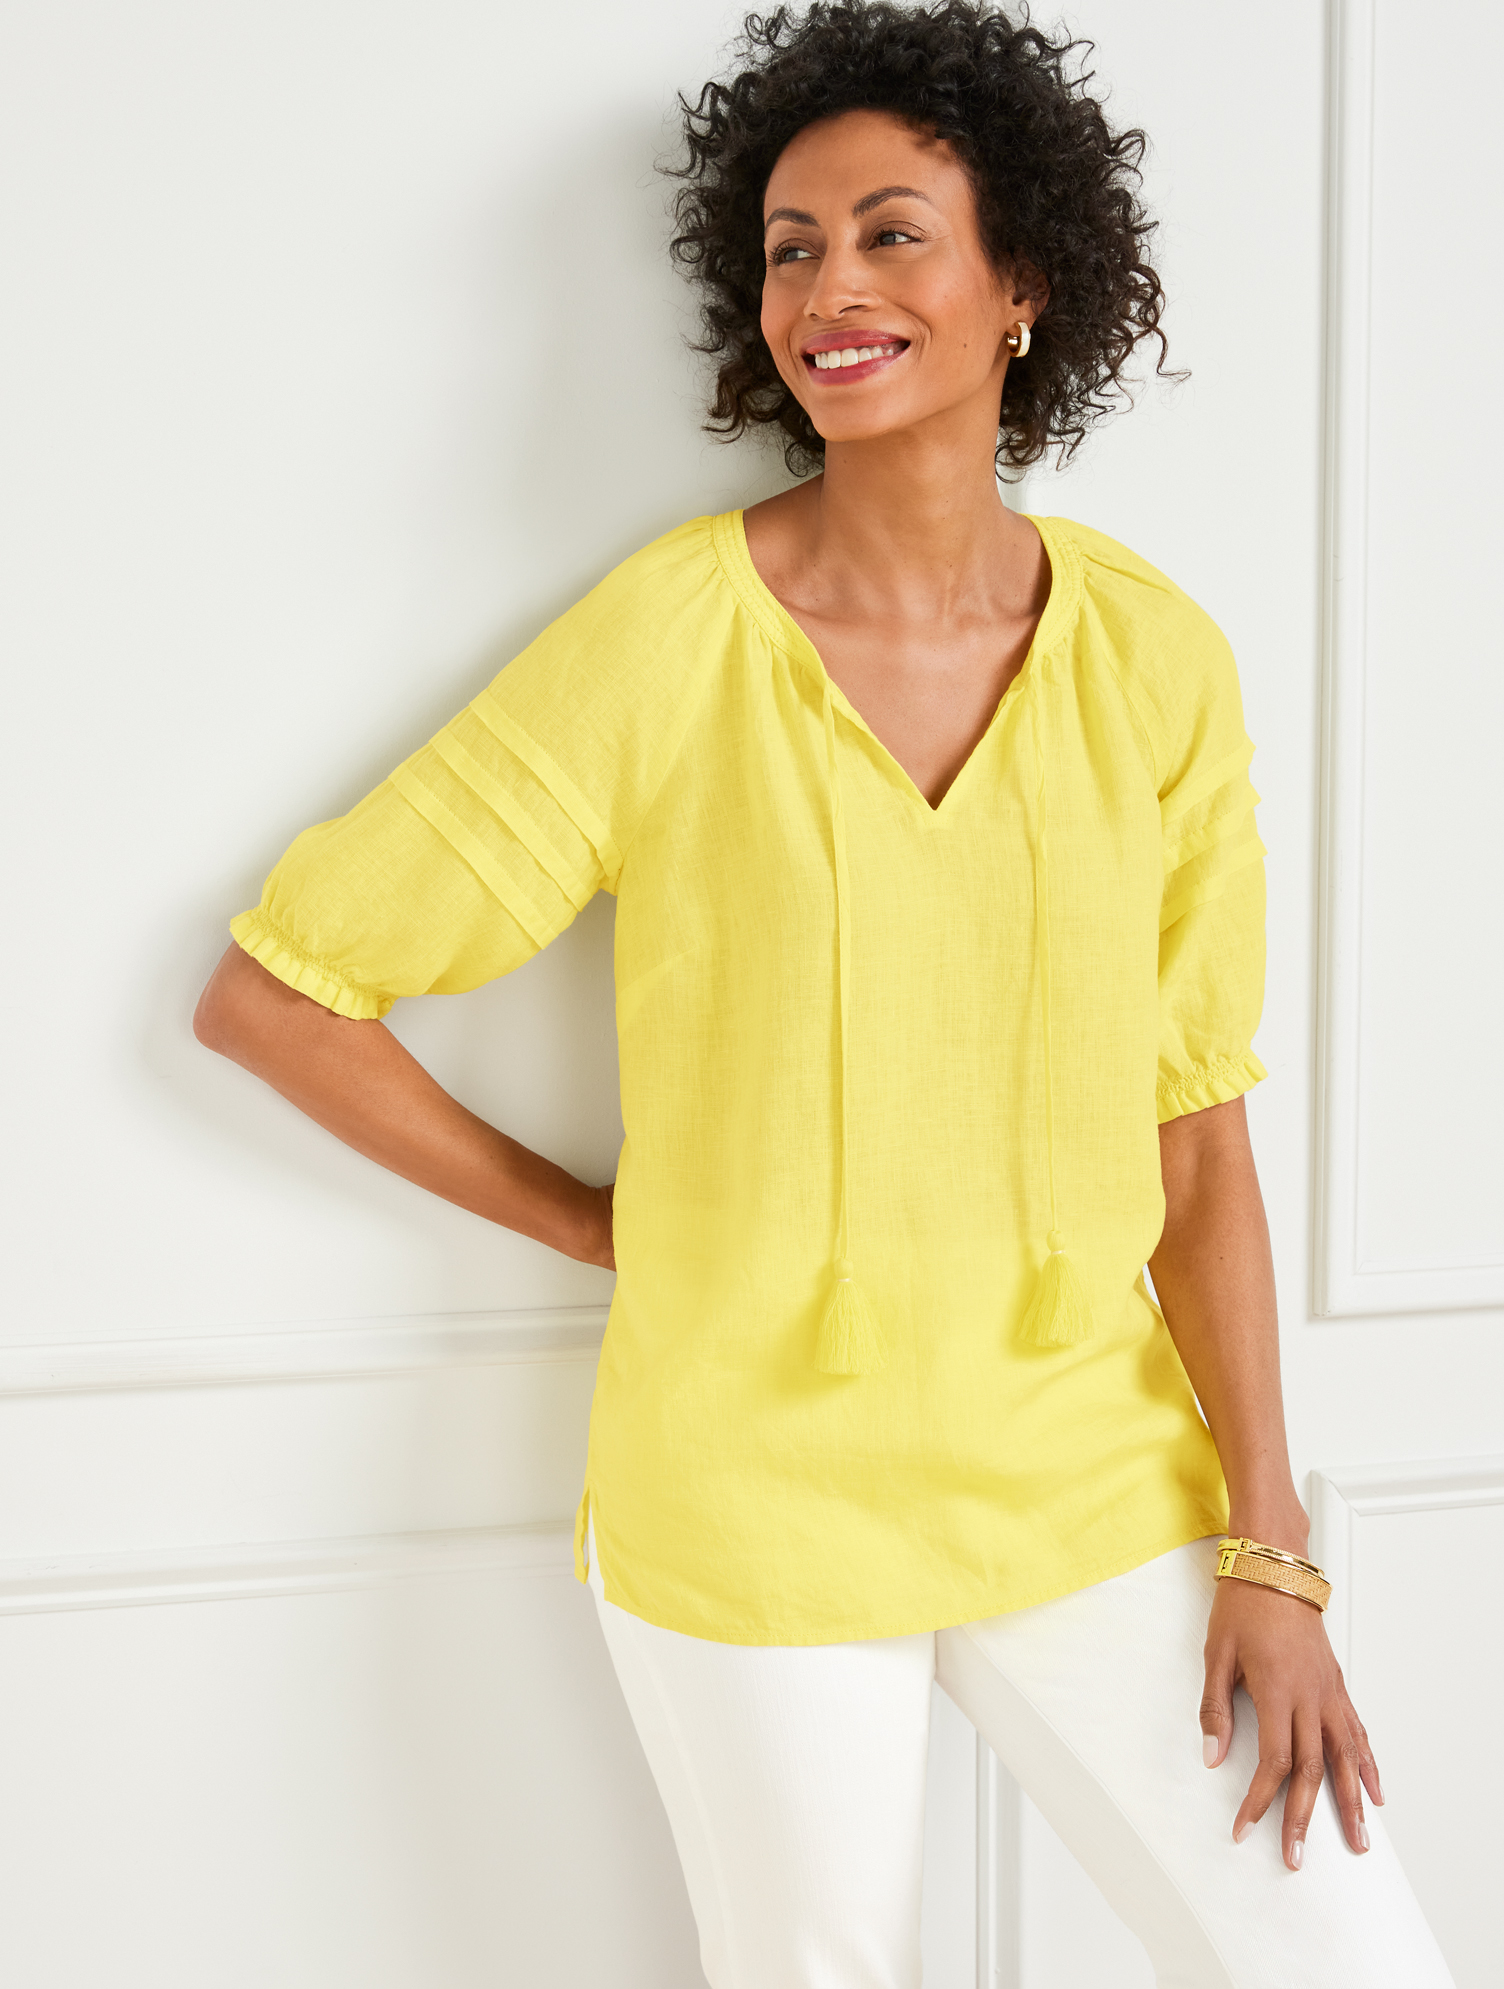 Talbots Pleated Sleeve Linen Top - Pear Yellow - 3x